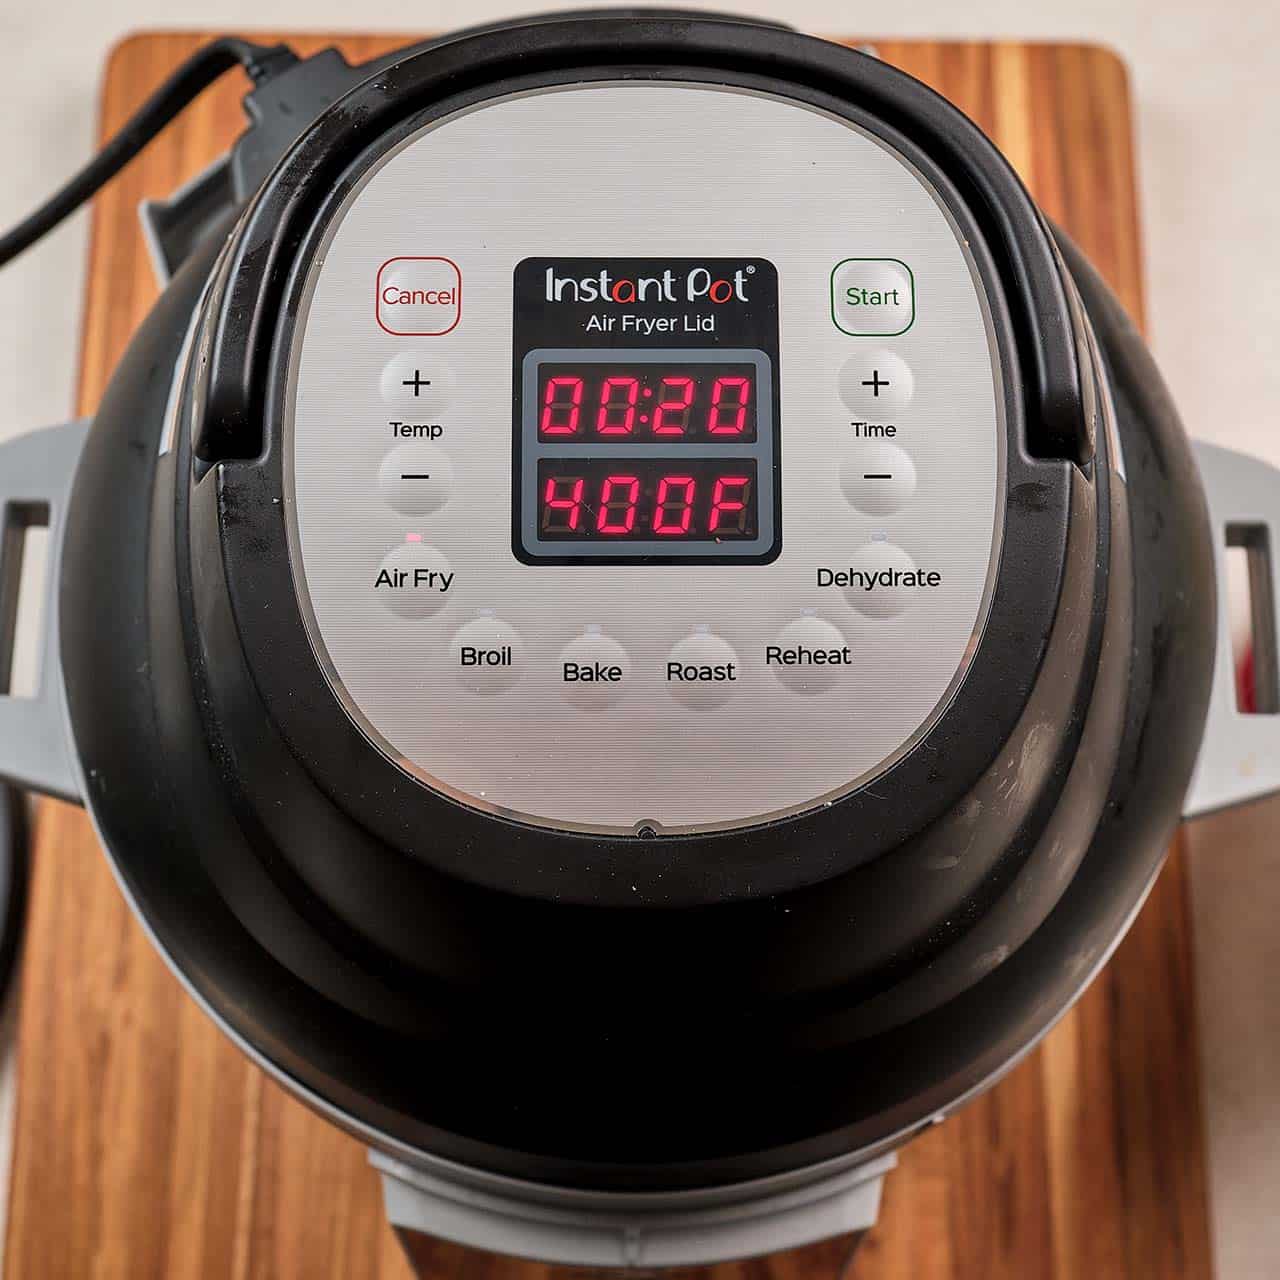 An Instant Pot Air Fryer Lid set to 400°F and 20 minutes